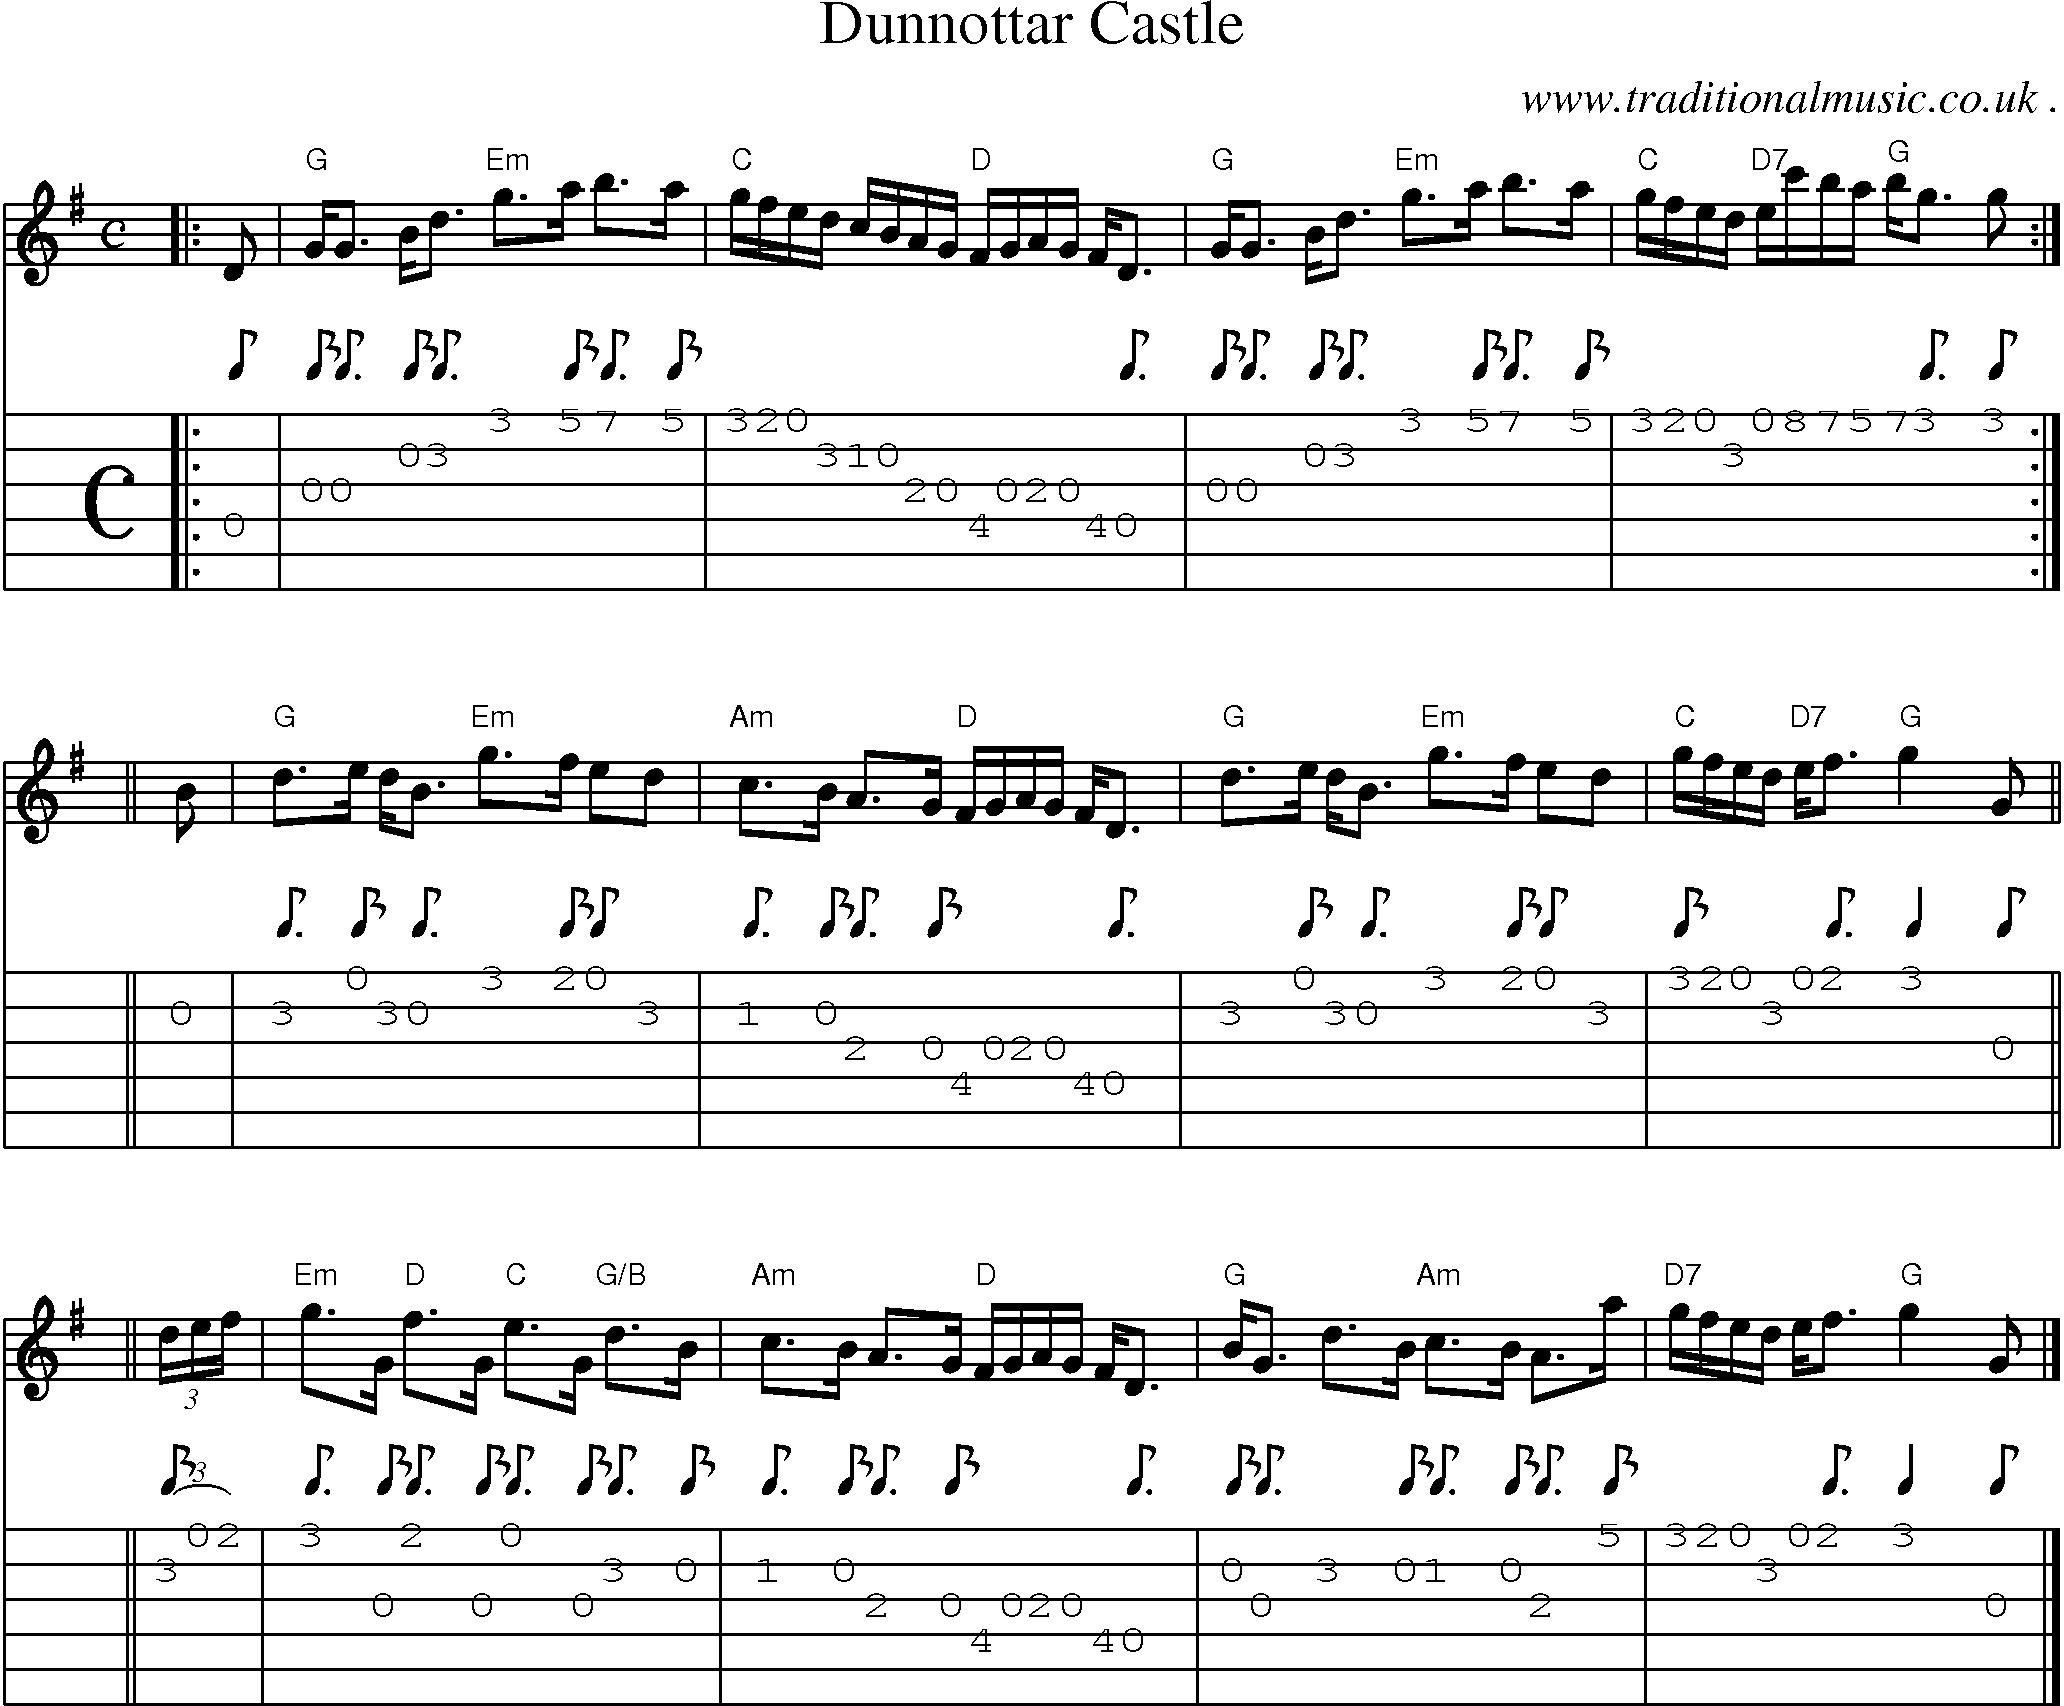 Sheet-music  score, Chords and Guitar Tabs for Dunnottar Castle